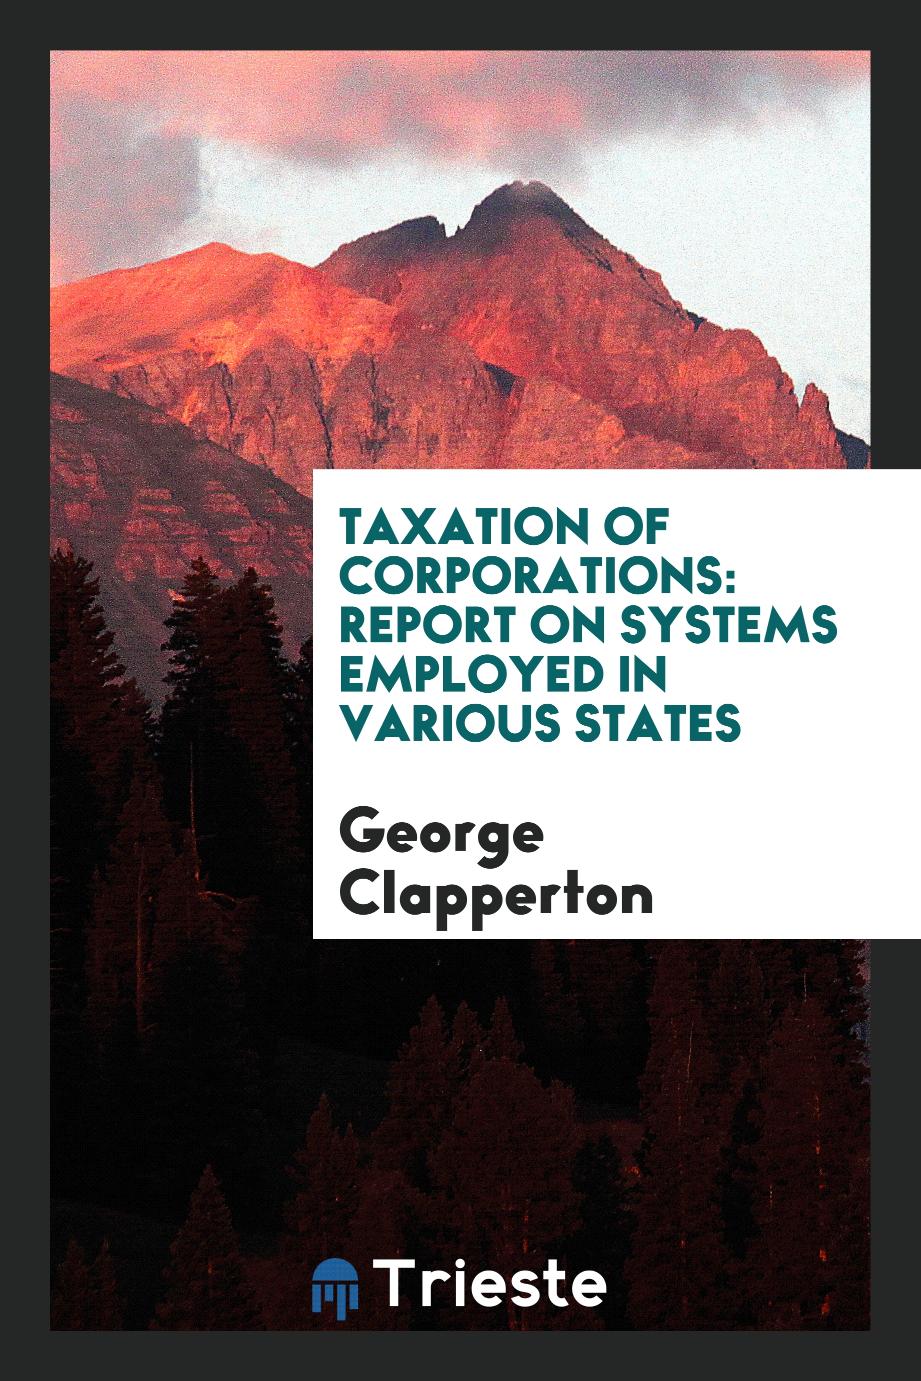 Taxation of corporations: report on systems employed in various states